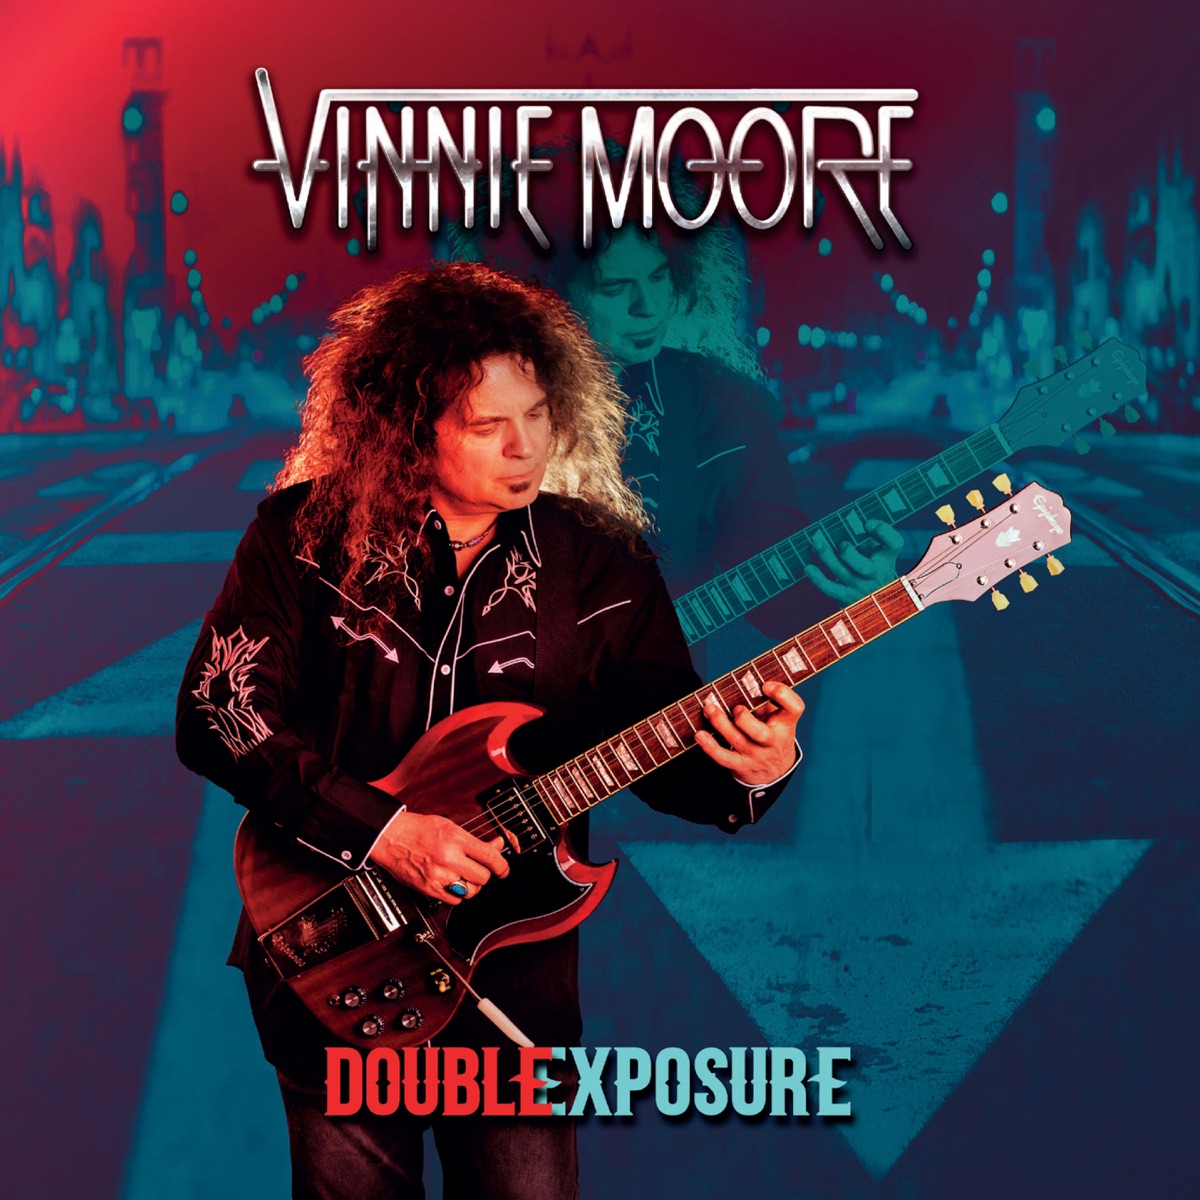 Time Odyssey - Album by Vinnie Moore - Apple Music